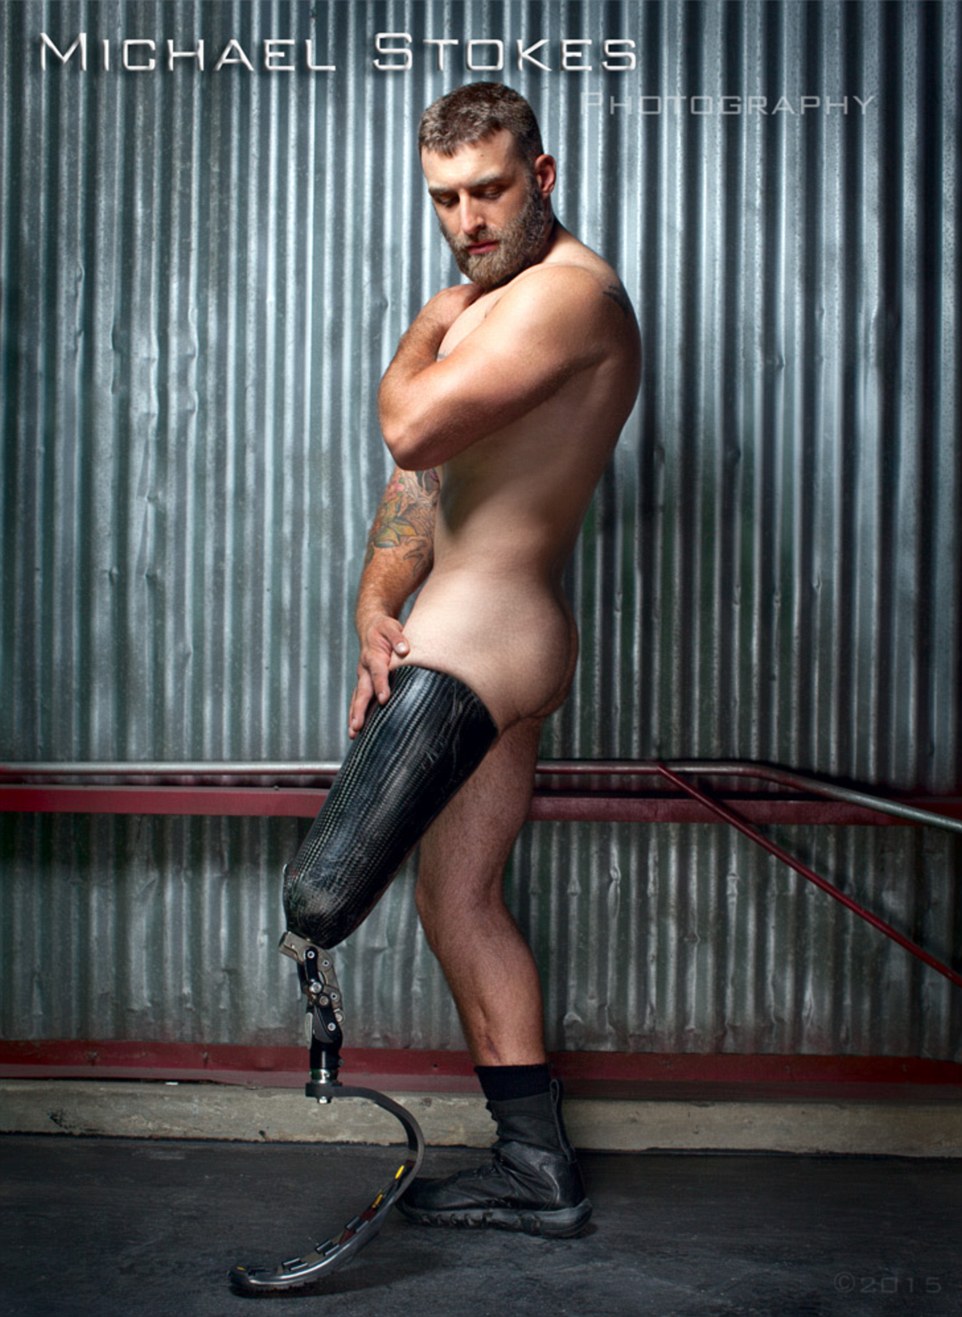 Michael Stokes; photographer; photography; male; model; nude; amputee; leg; earl granville; BT Urruela; soldiers; army; IED; bomb; wounded; veterans